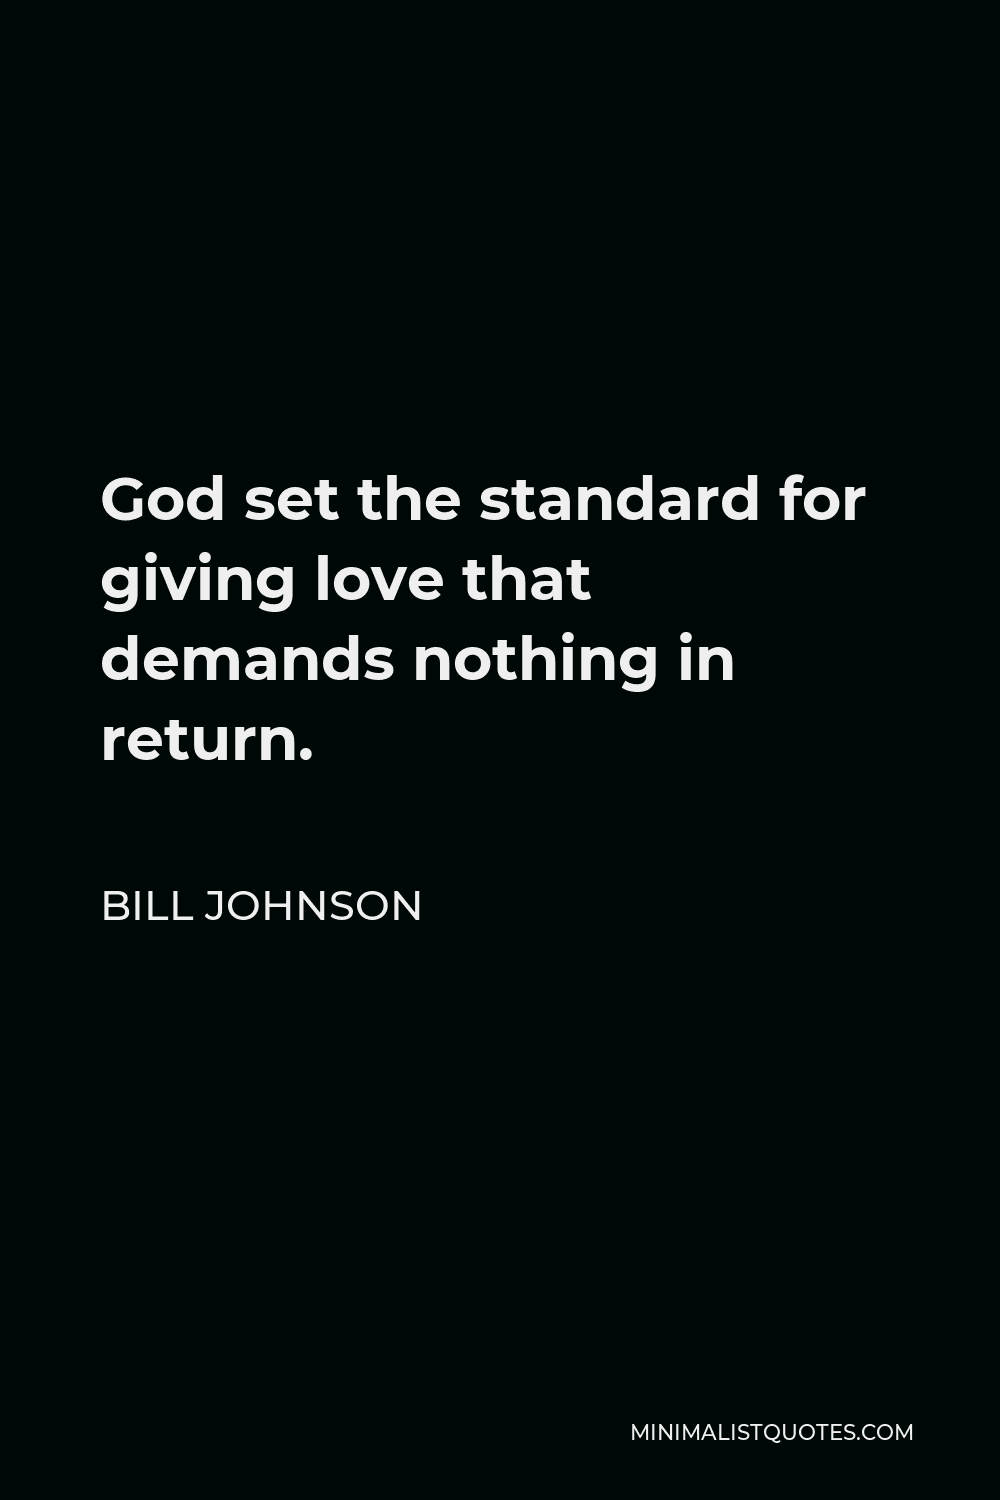 Bill Johnson Quote - God set the standard for giving love that demands nothing in return.